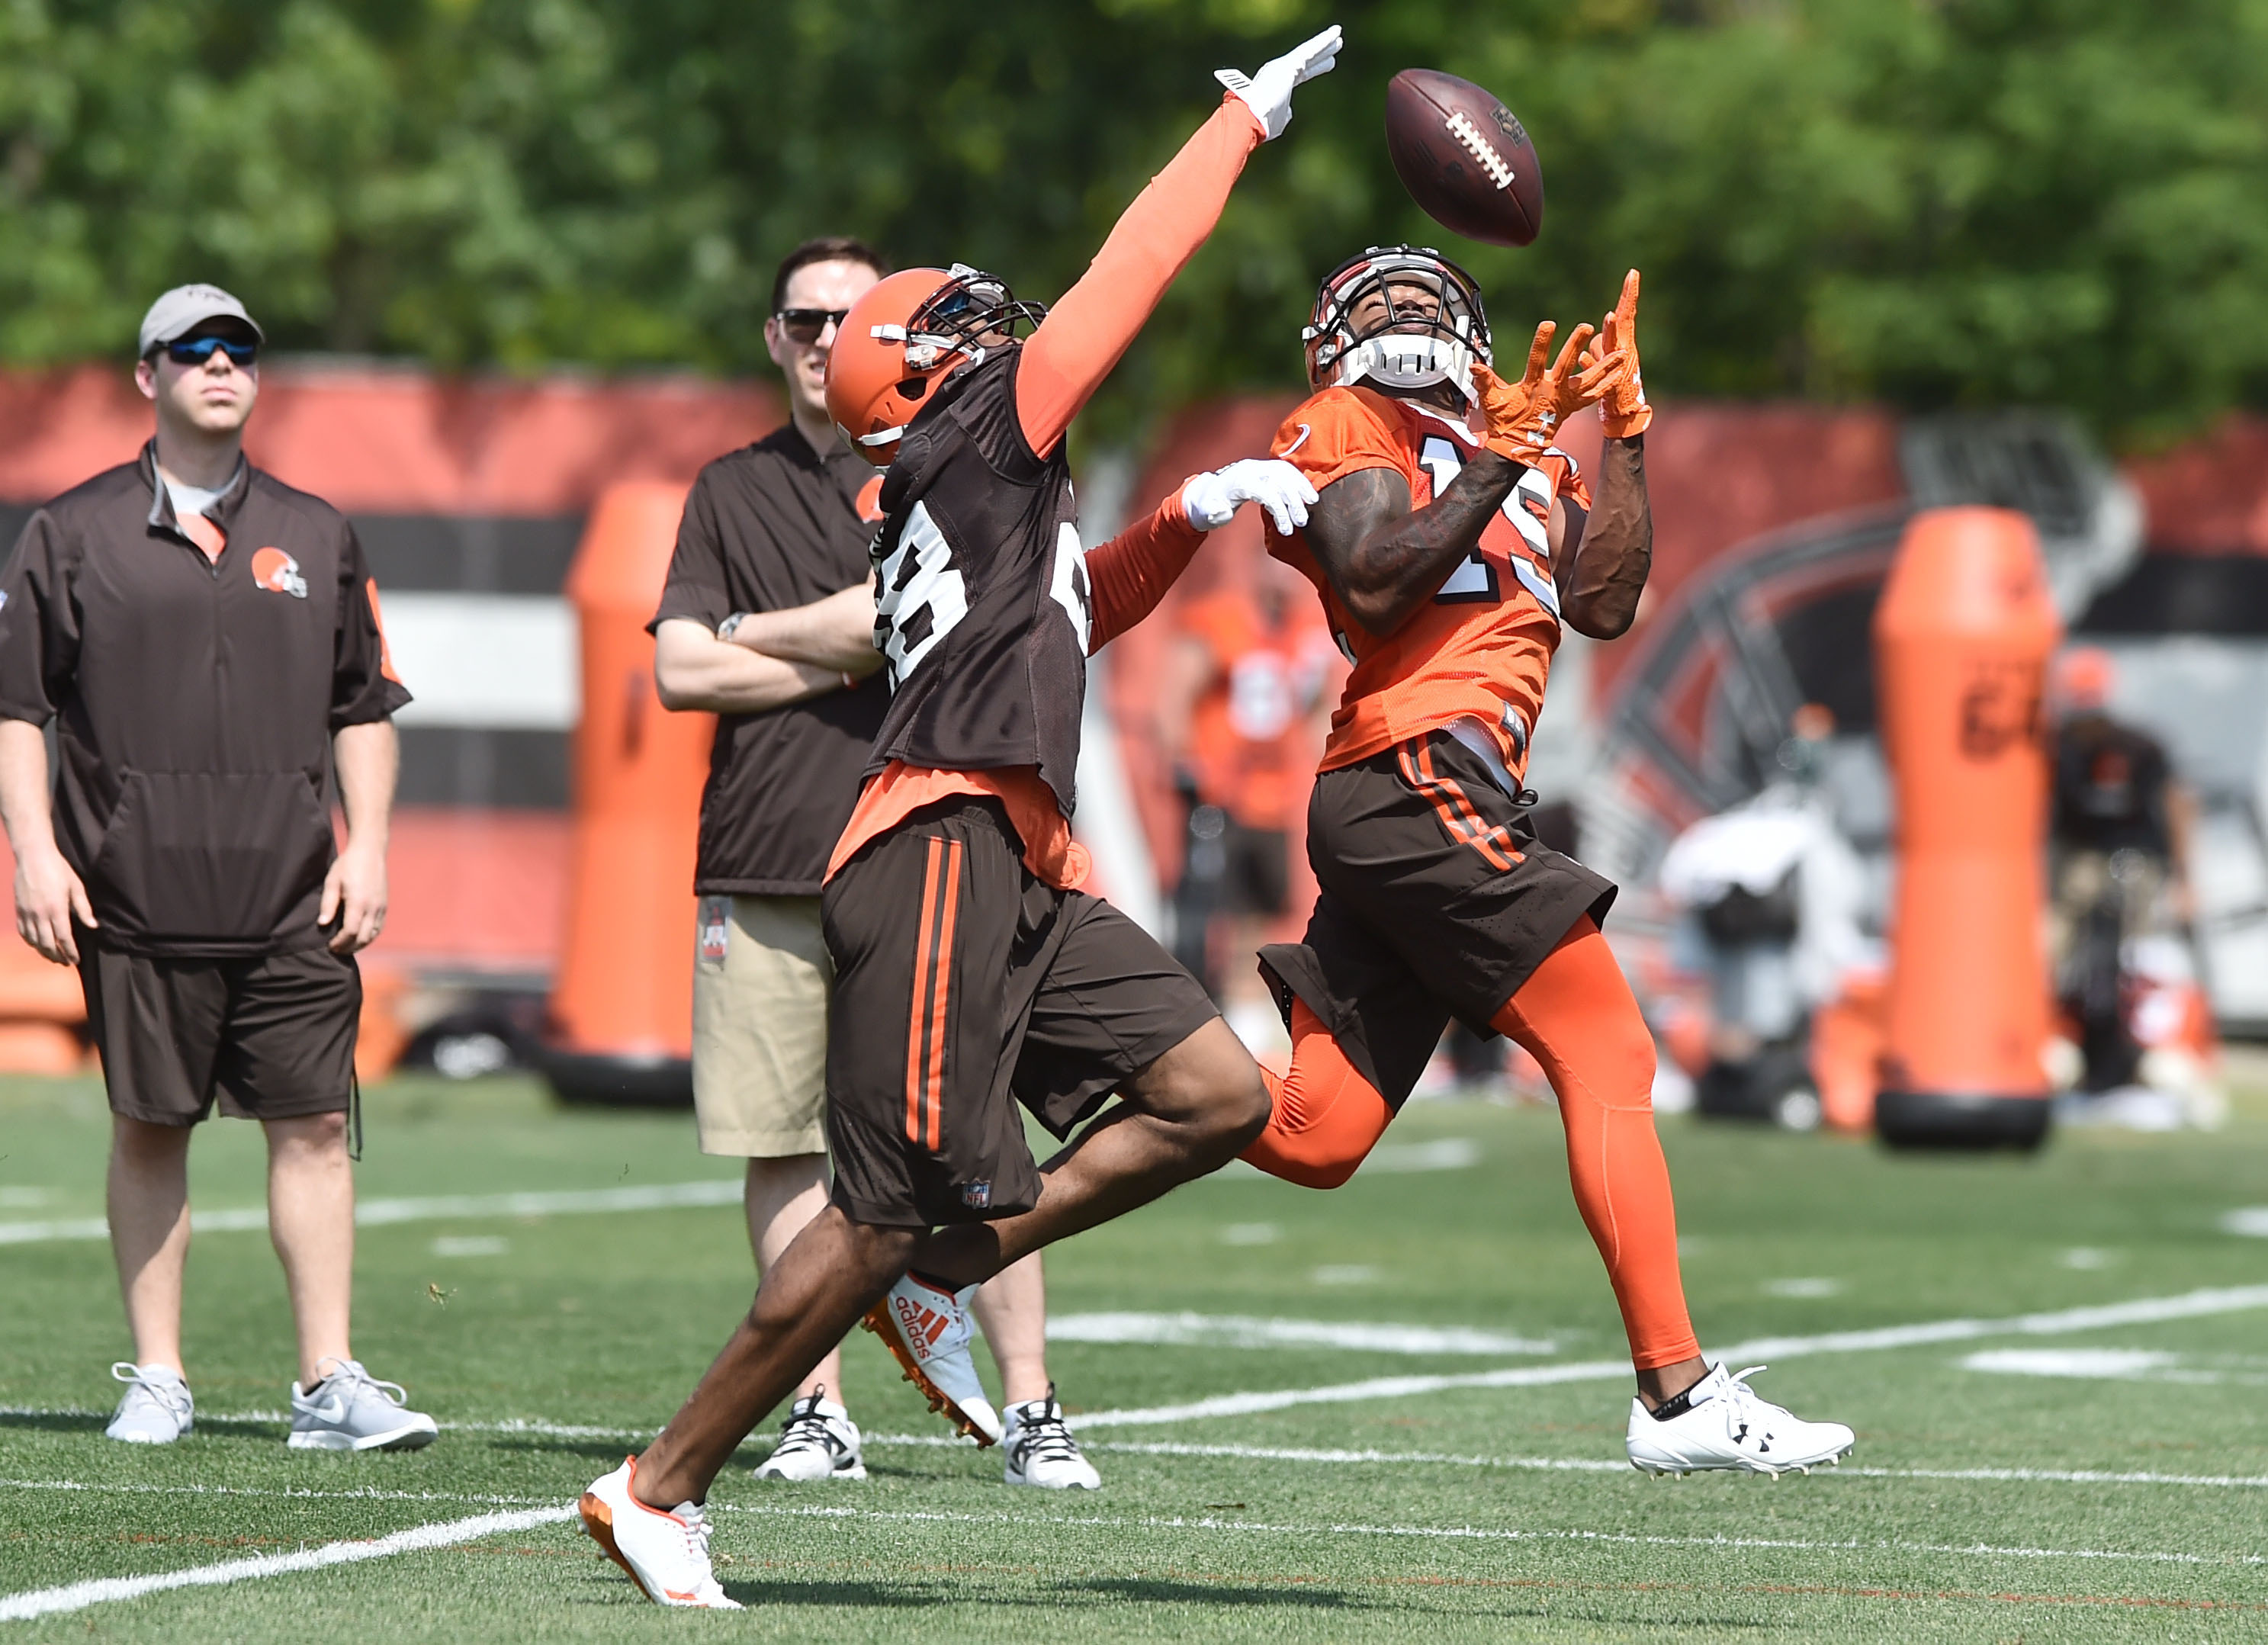 Browns Training Camp Everything you need to know for your visit